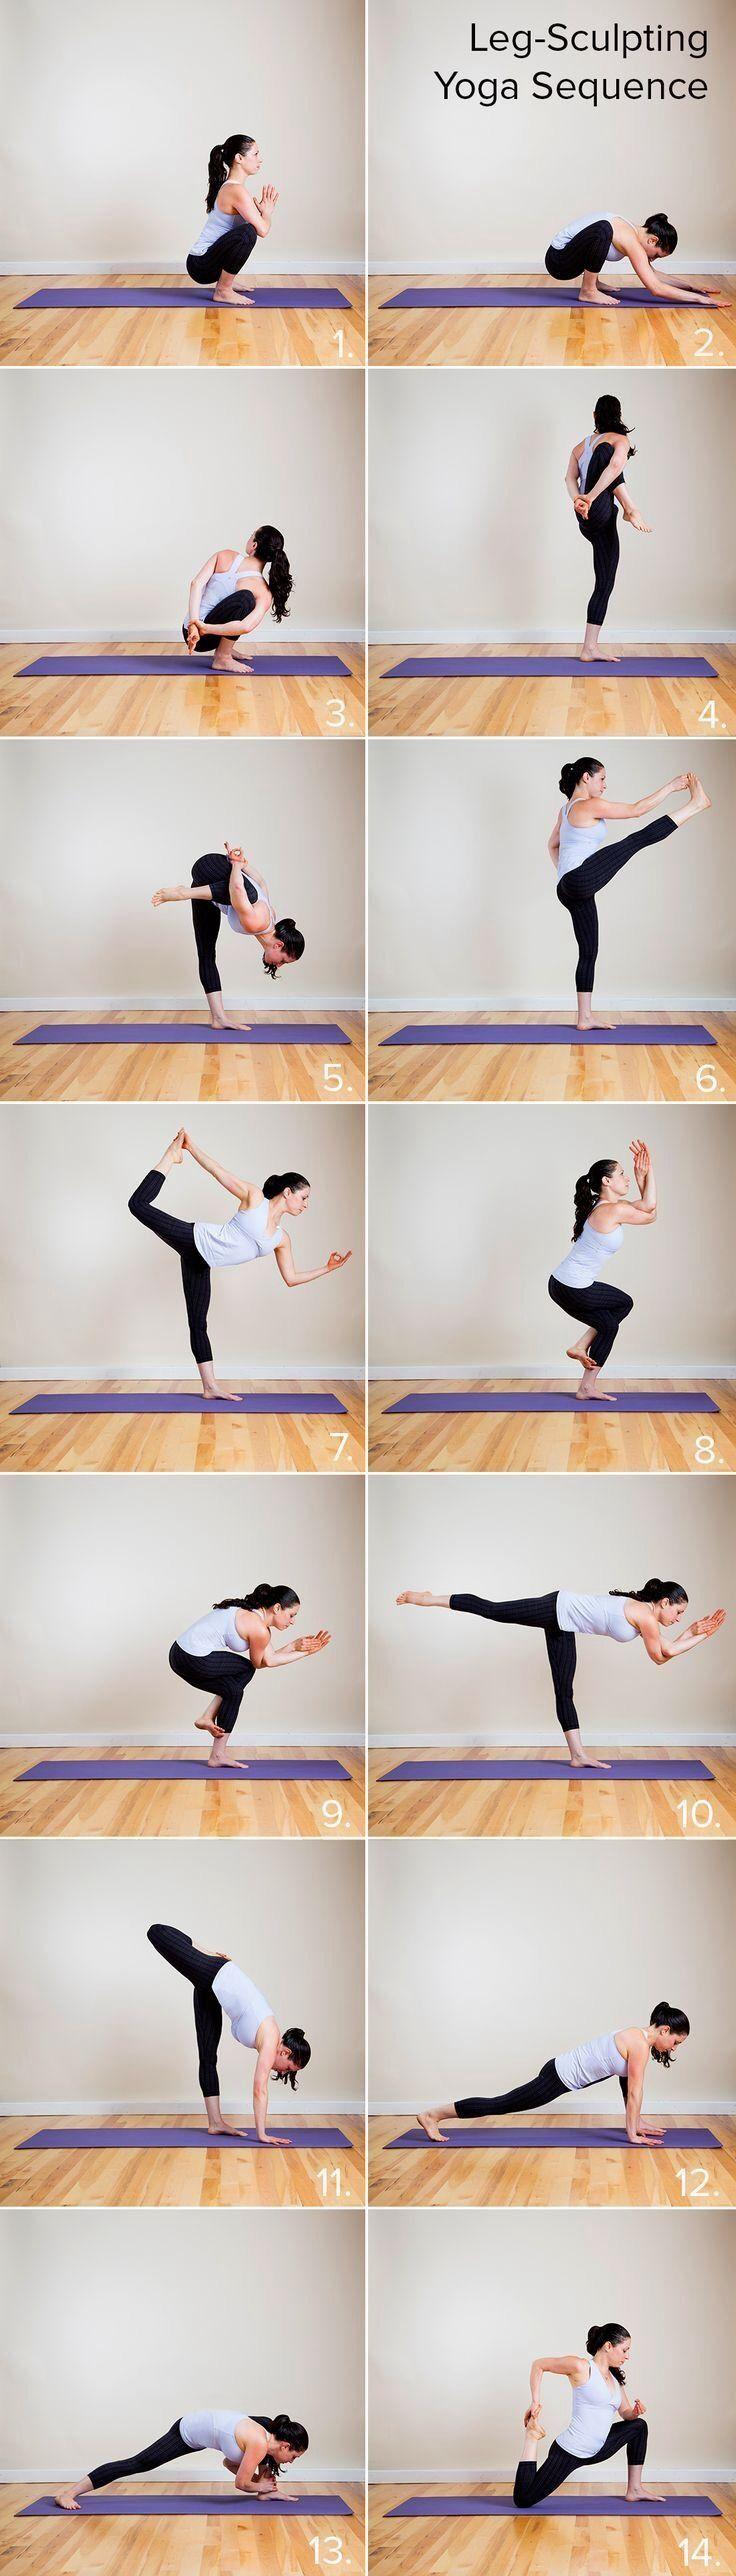 Wedding - Holy Hot! Yoga Sequence To Do Your Tight Pants Justice